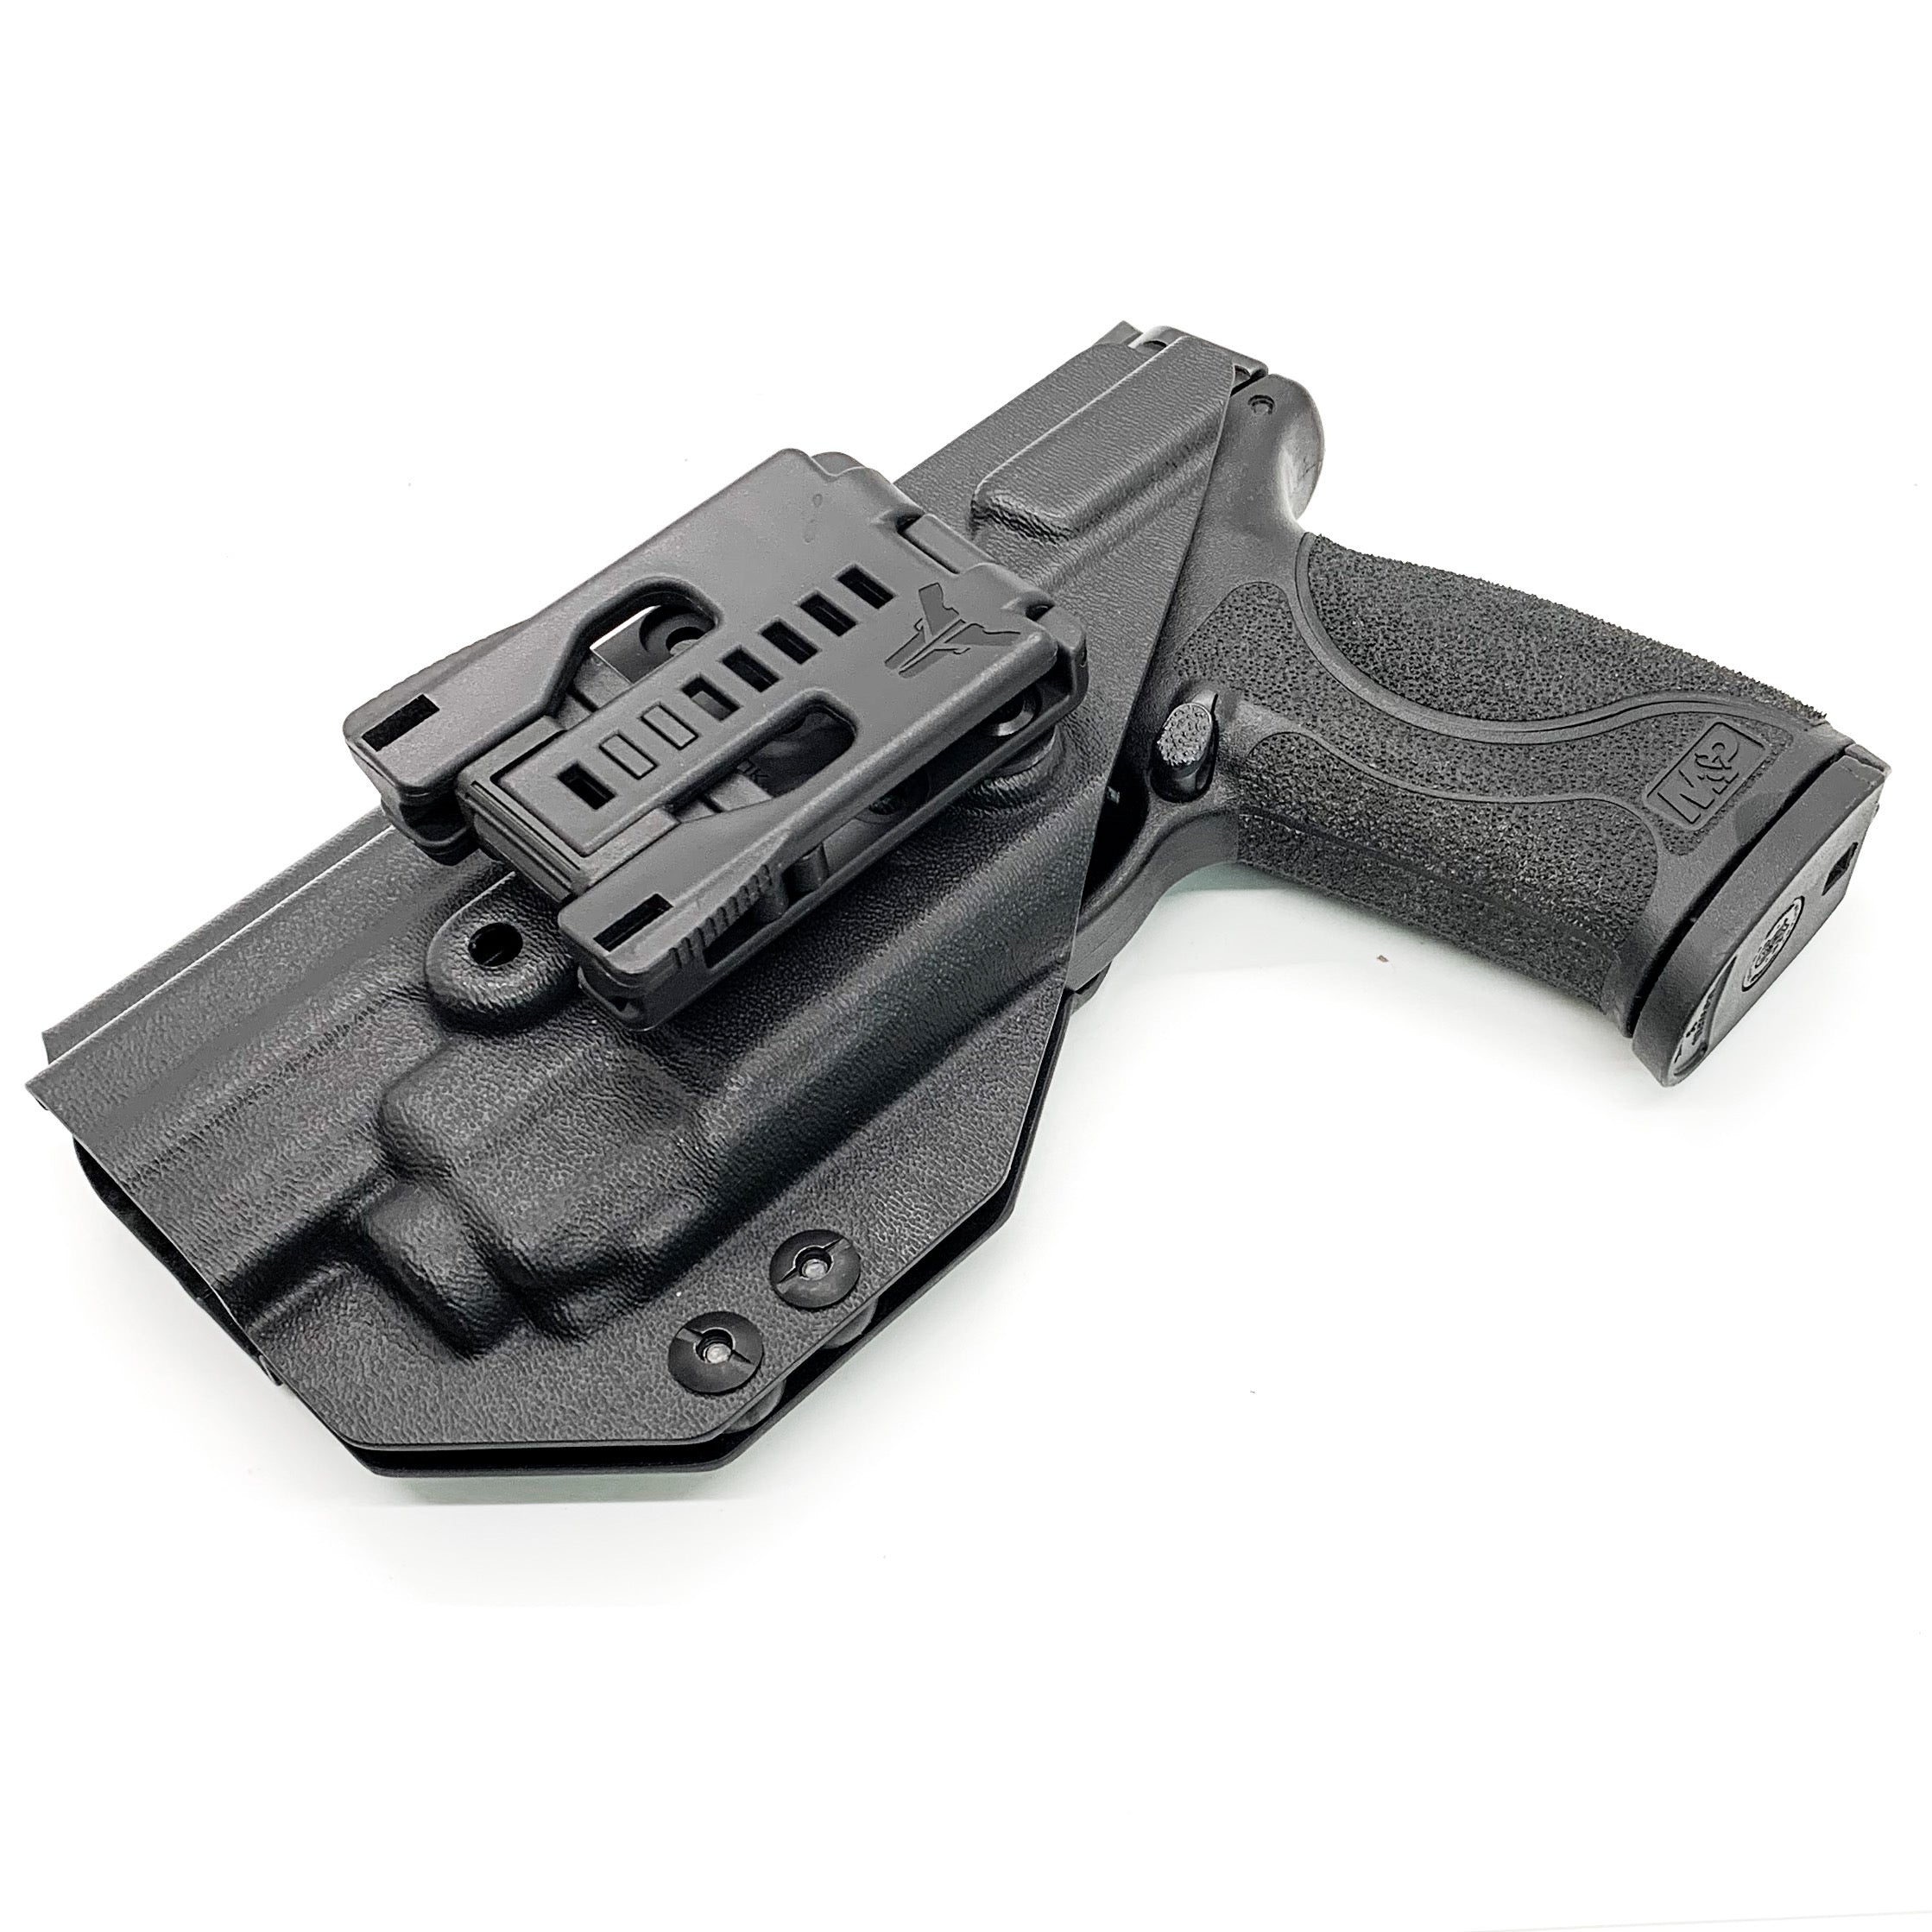 For the best, Outside Waistband OWB Kydex Taco Holster designed to fit the Smith & Wesson M&P 4" 10mm M2.0 pistol with thumb safety & TLR-8A handgun, shop Four Brothers Holsters.  Full sweat guard, adjustable retention, profiled for a red dot sight.  Proudly made in the USA for veterans and law enforcement.